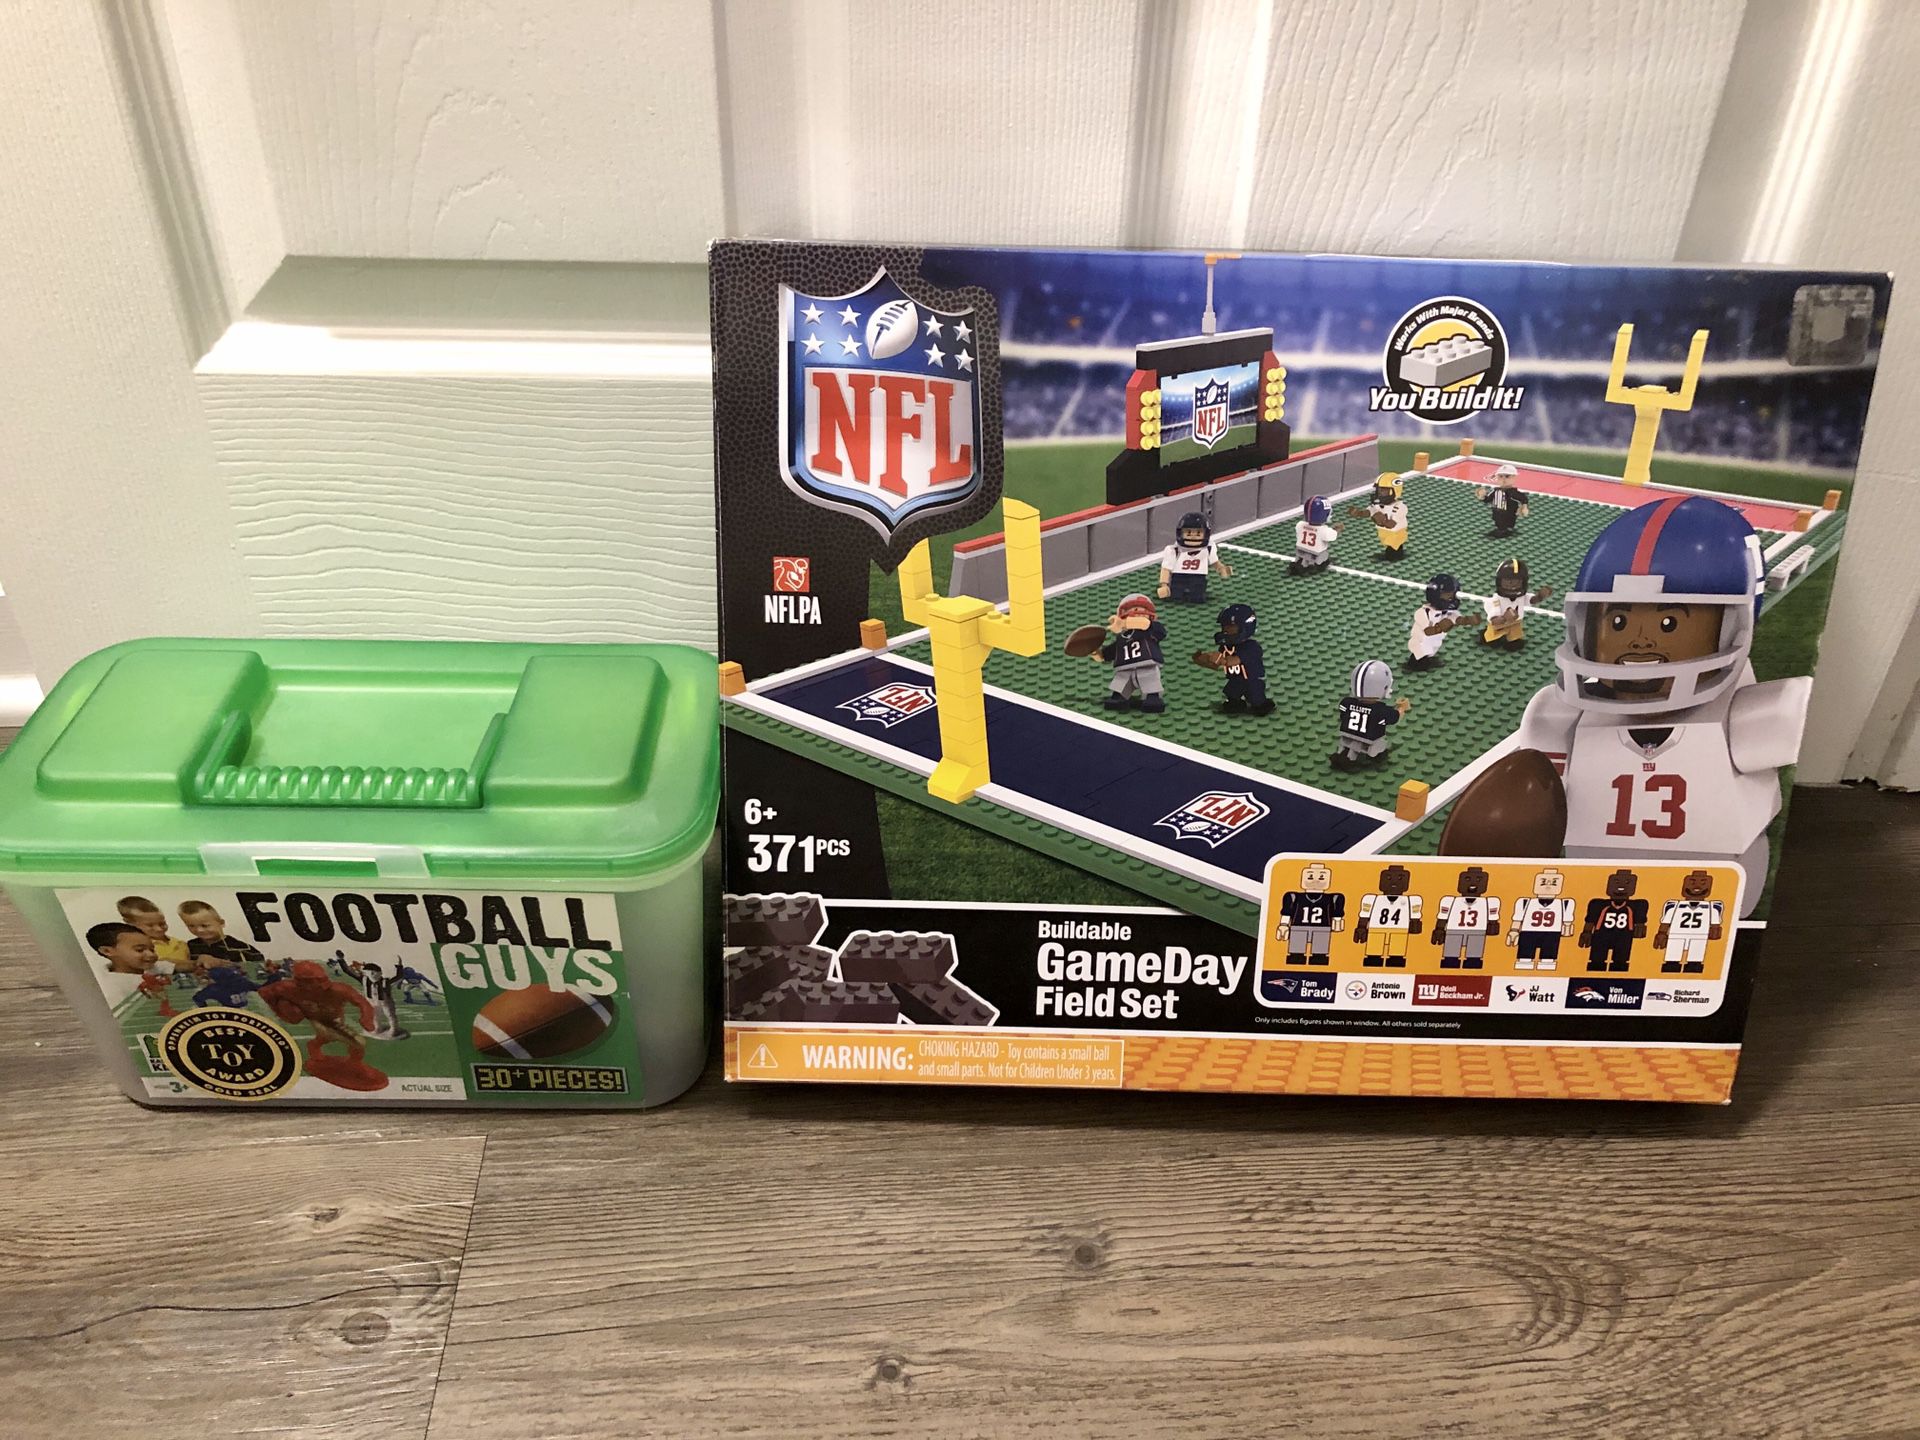 NFL Lego set and Exclusive College Football Hall of Fame football set